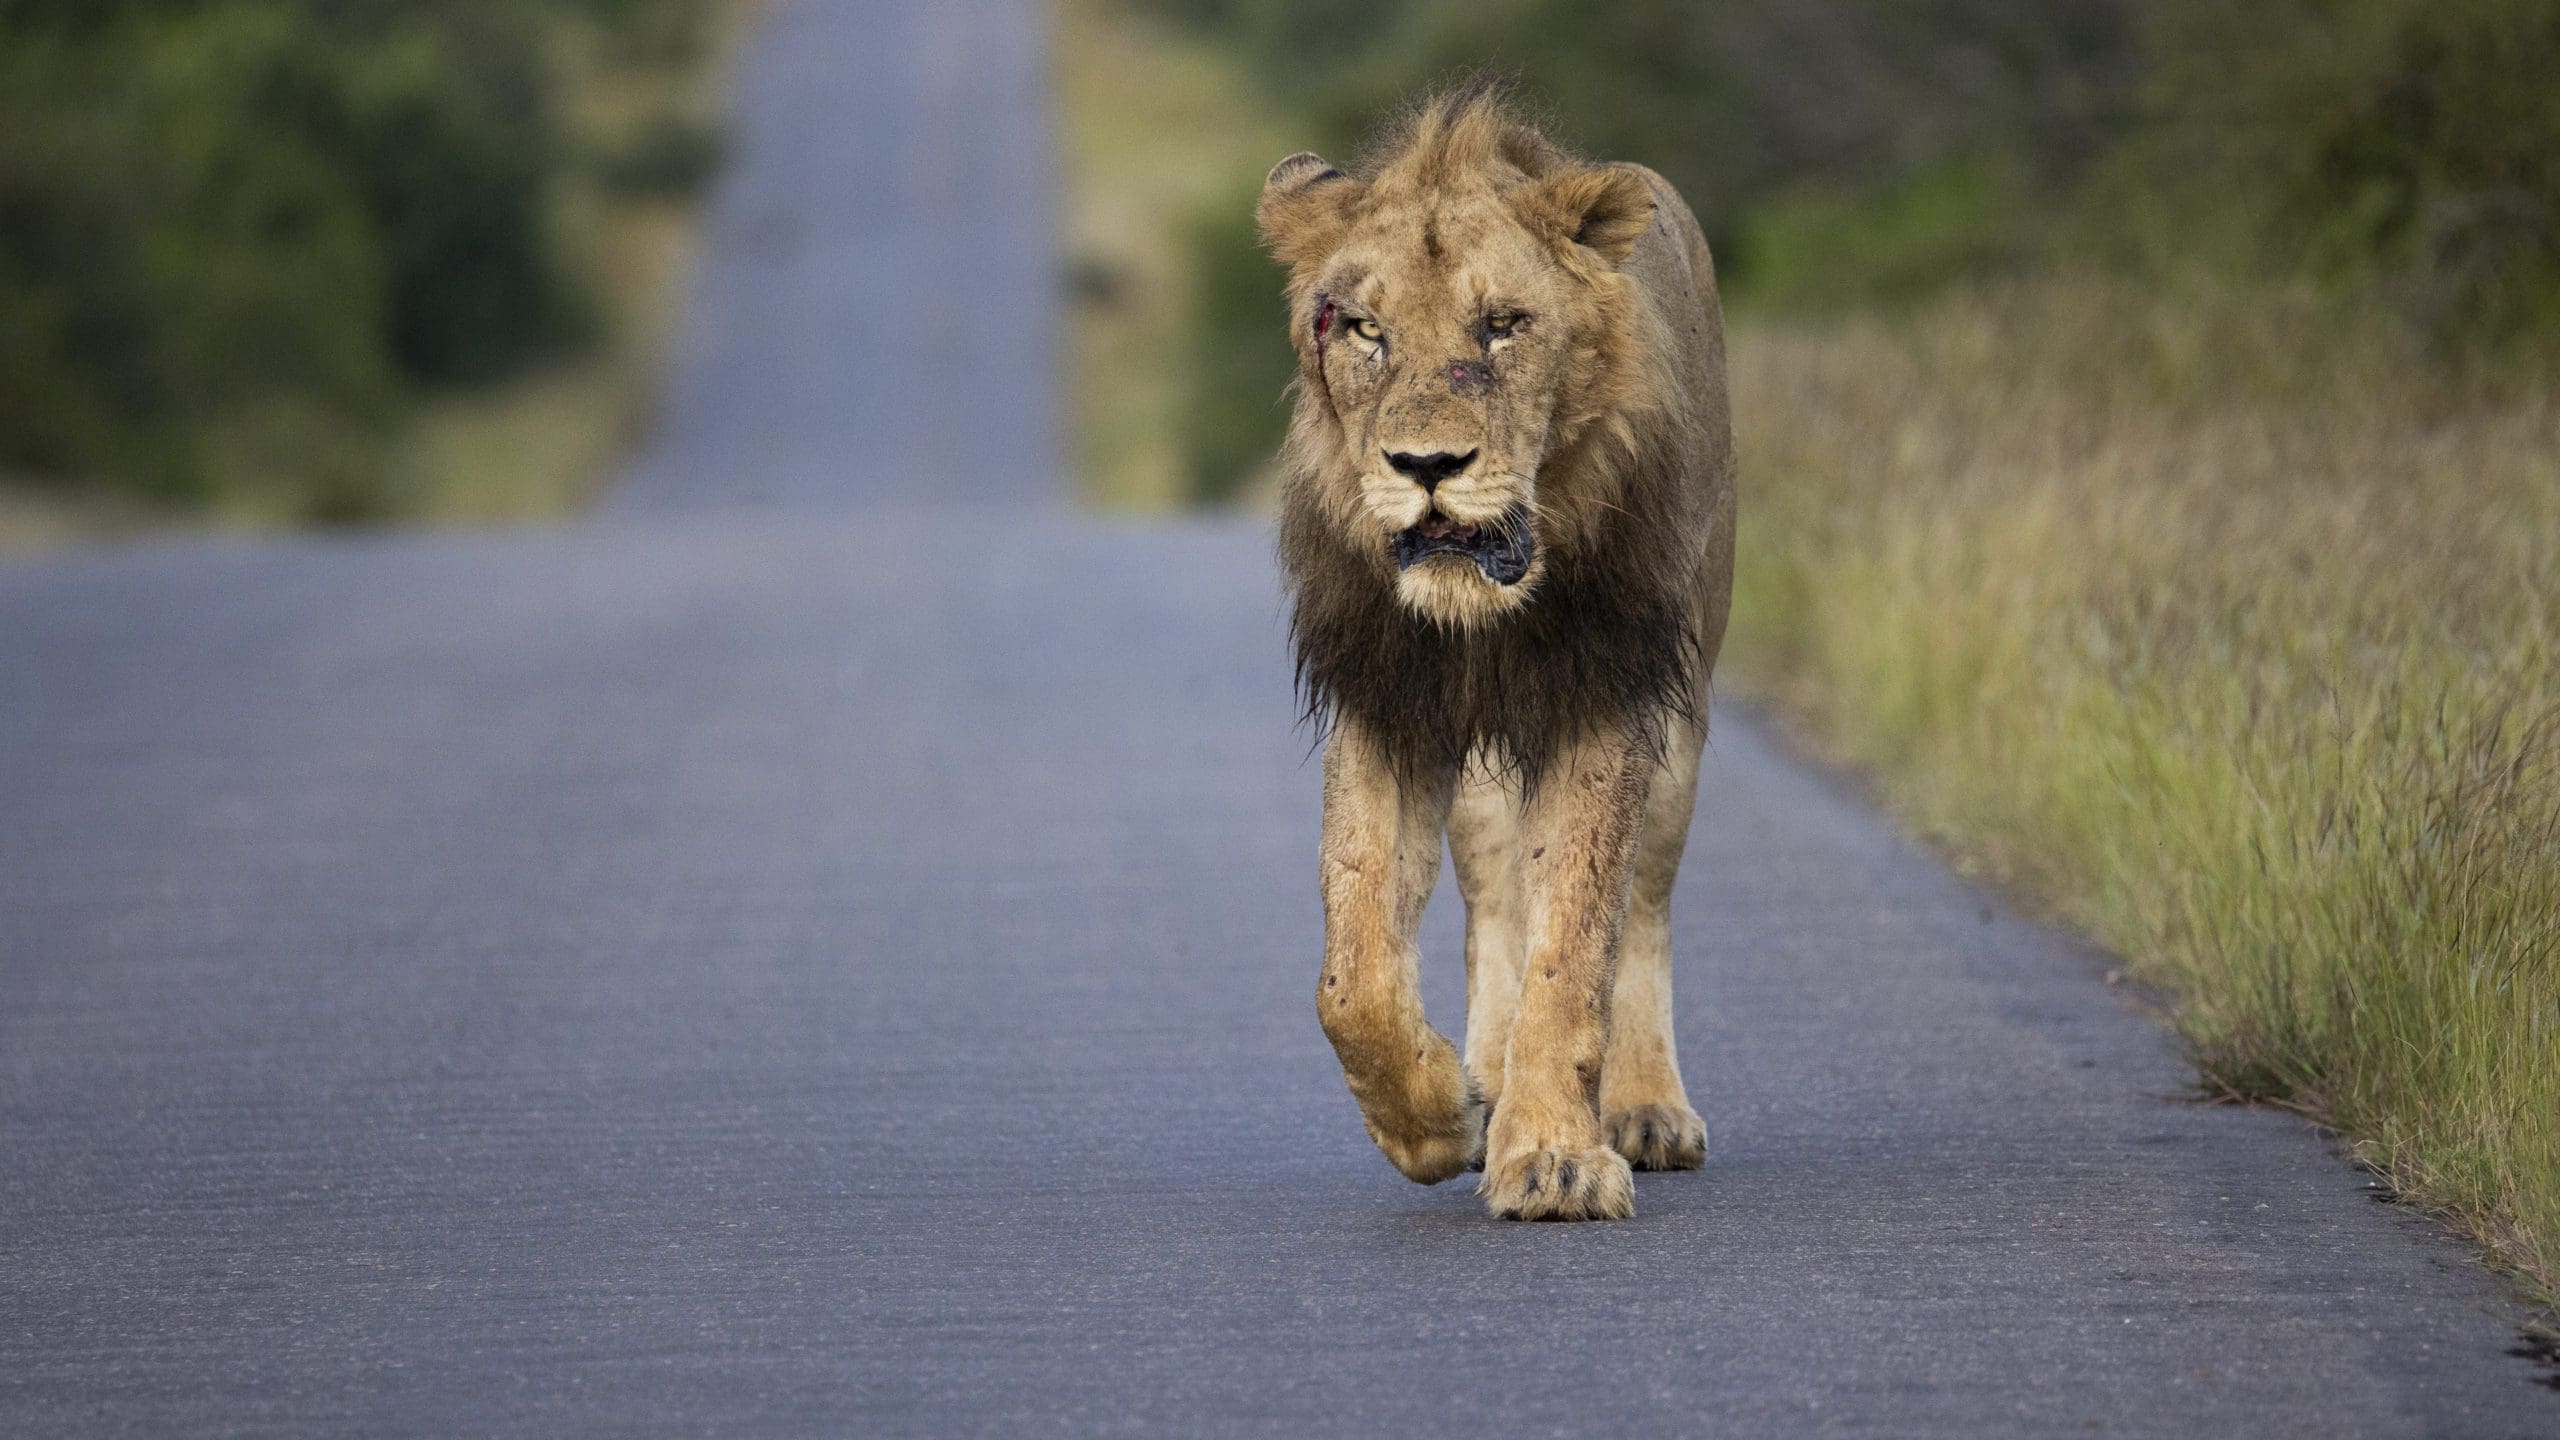 The Best Places To See Lions In Africa